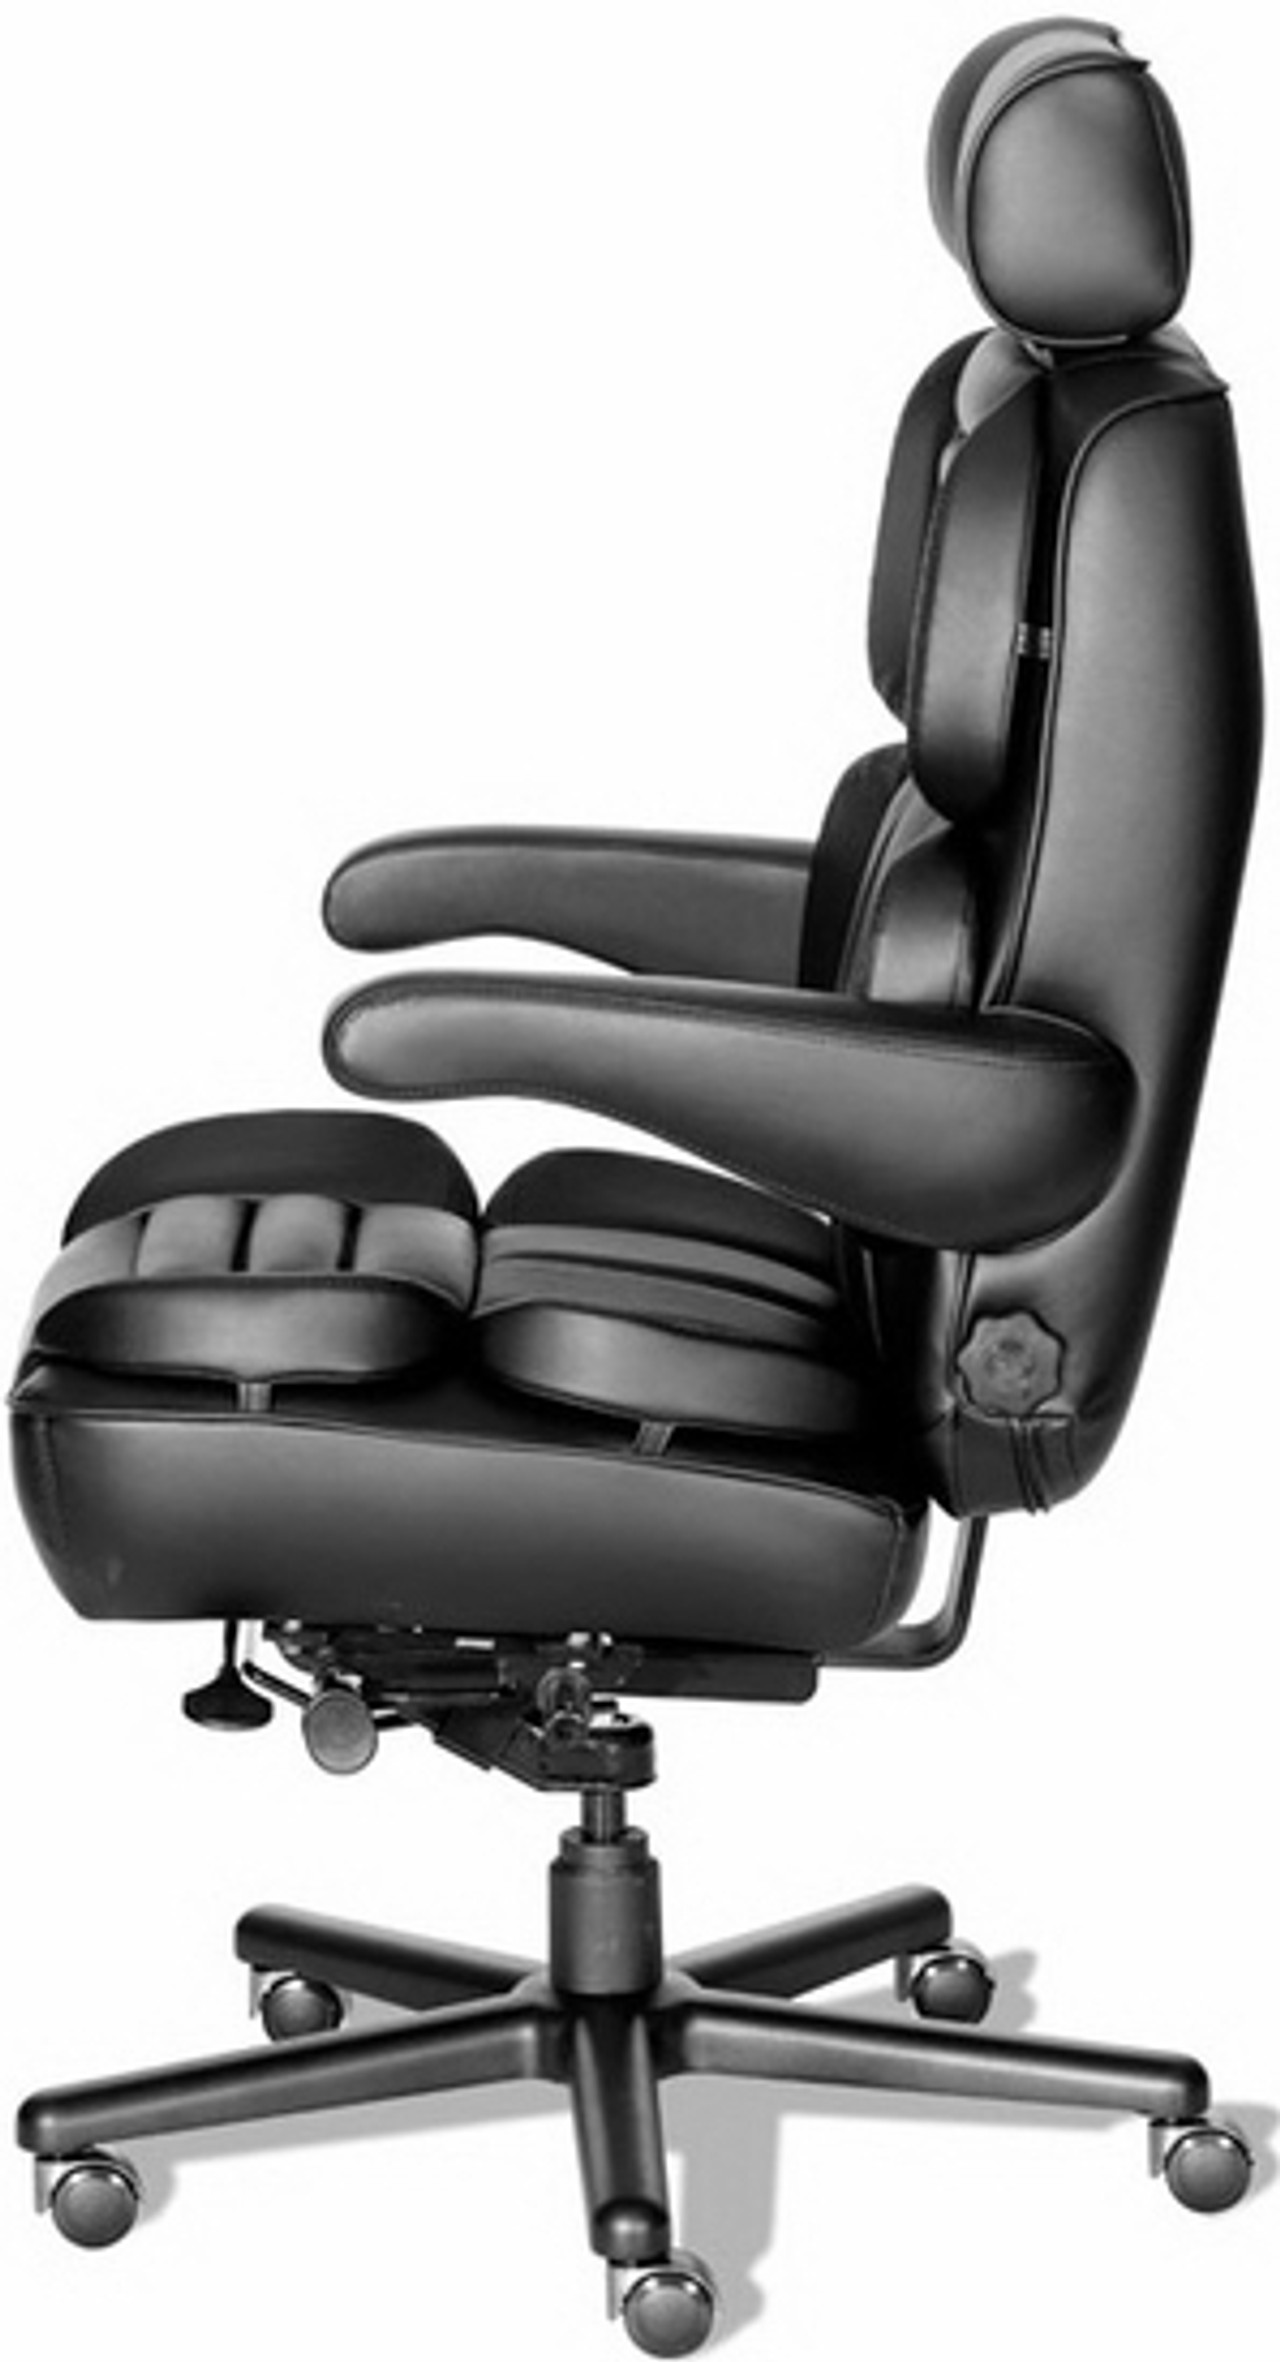 Galaxy Big And Tall Executive Office Chair Glxy 2  93688.1425342193 ?c=2